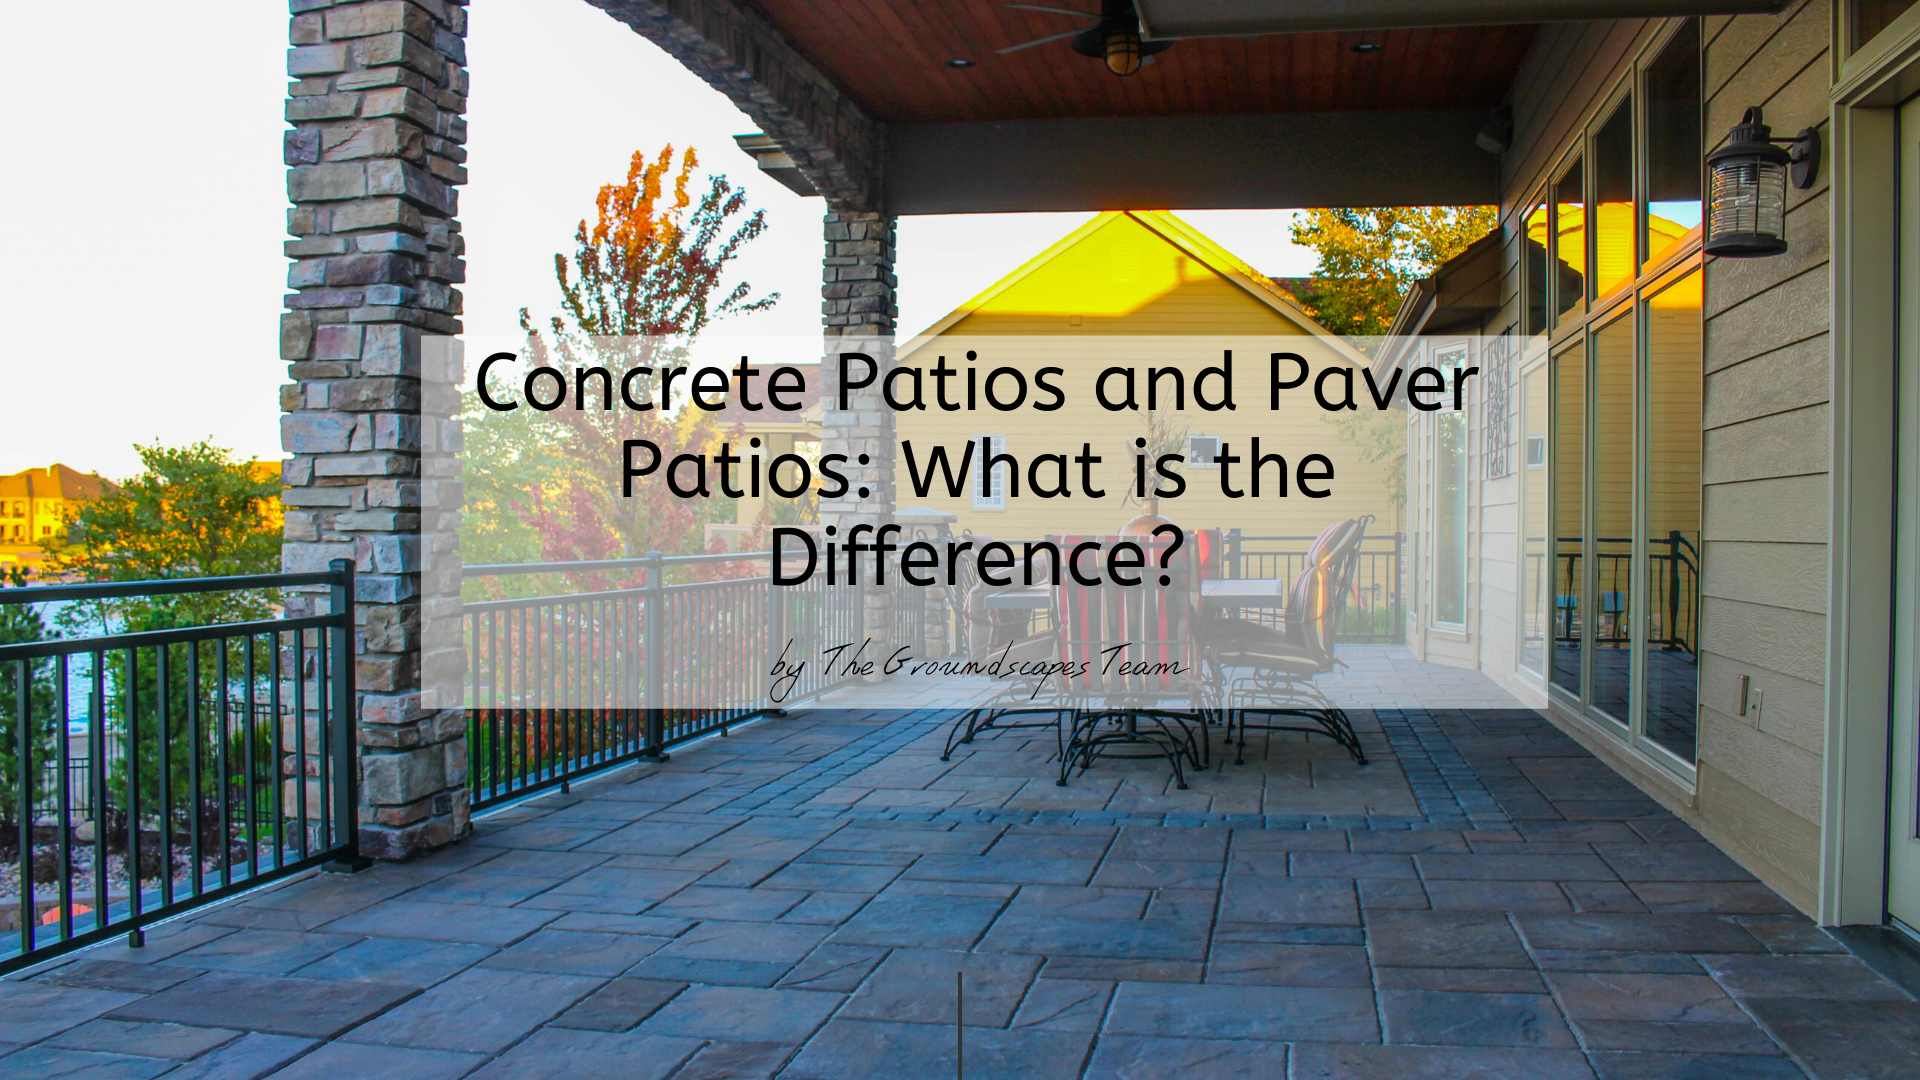 Concrete Patios and Paver Patios: What is the Difference?